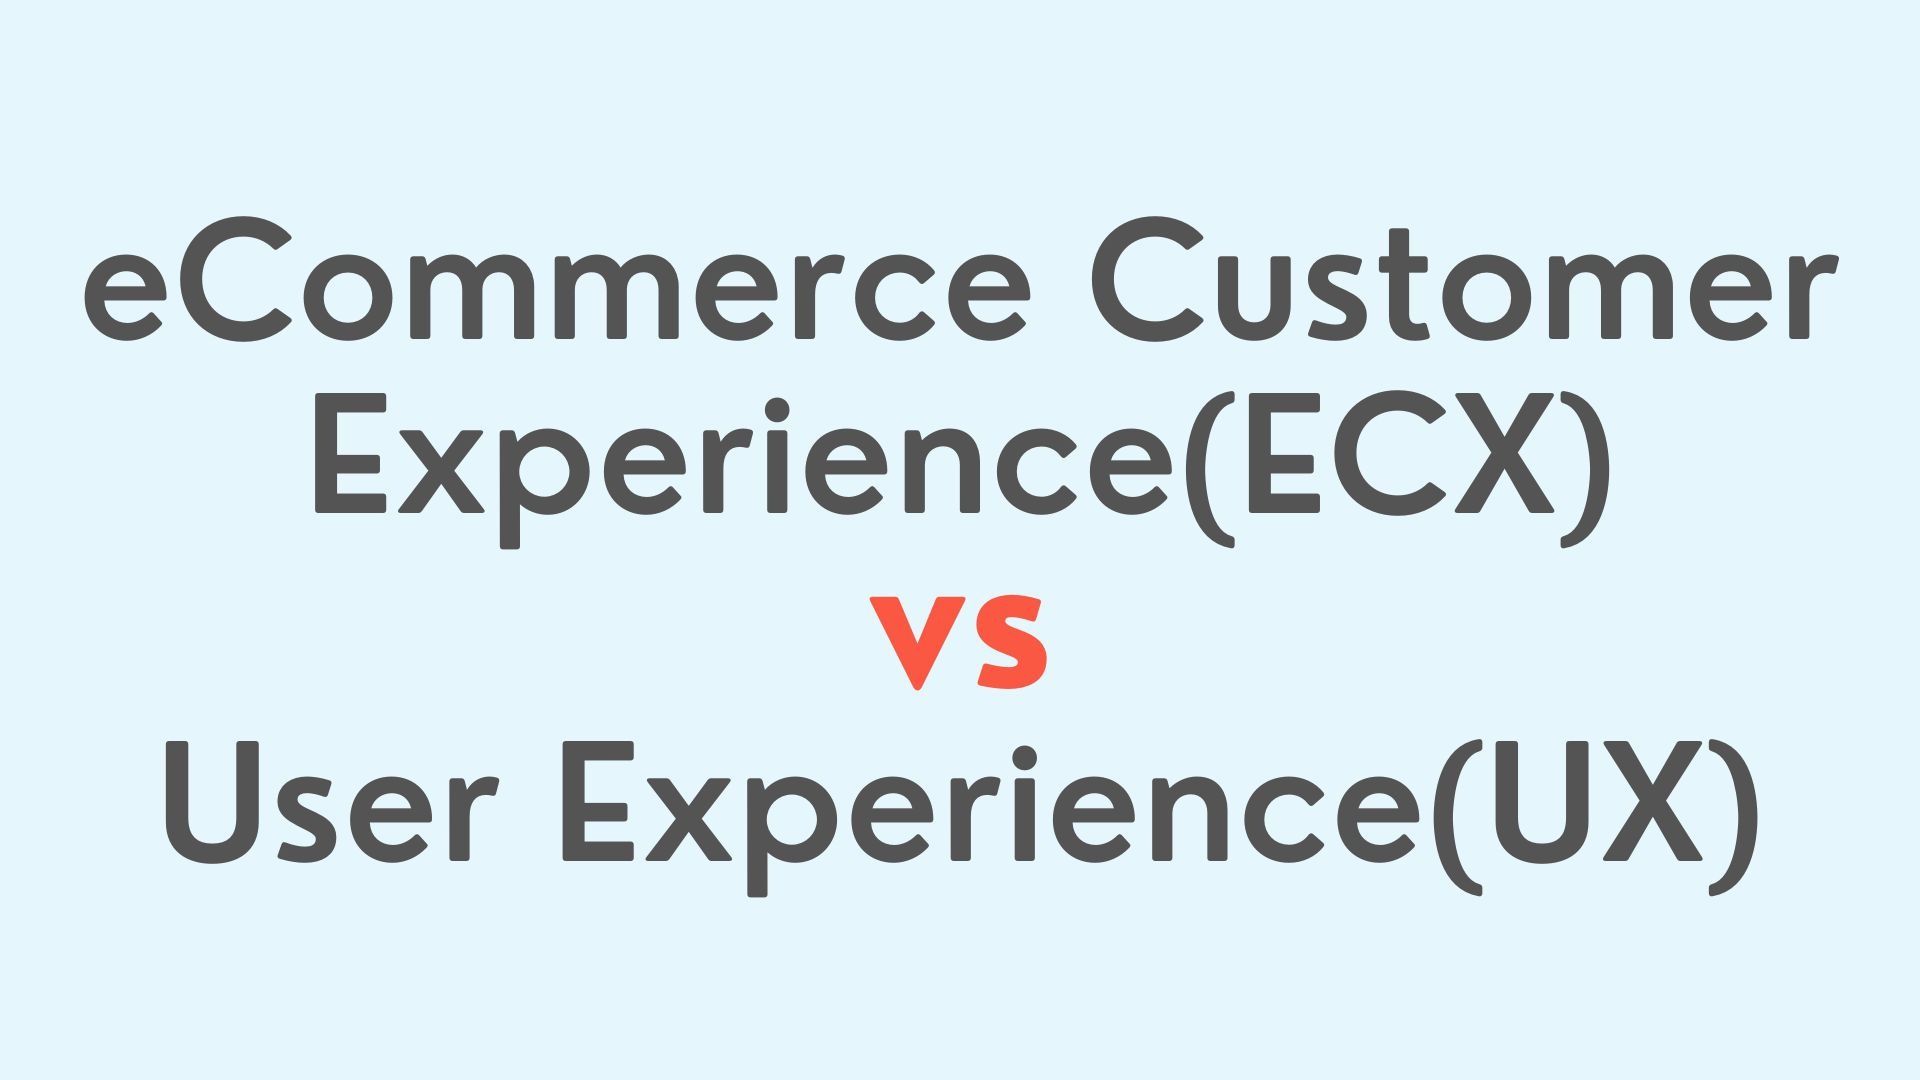 eCommerce Customer Experience Vs User Experience